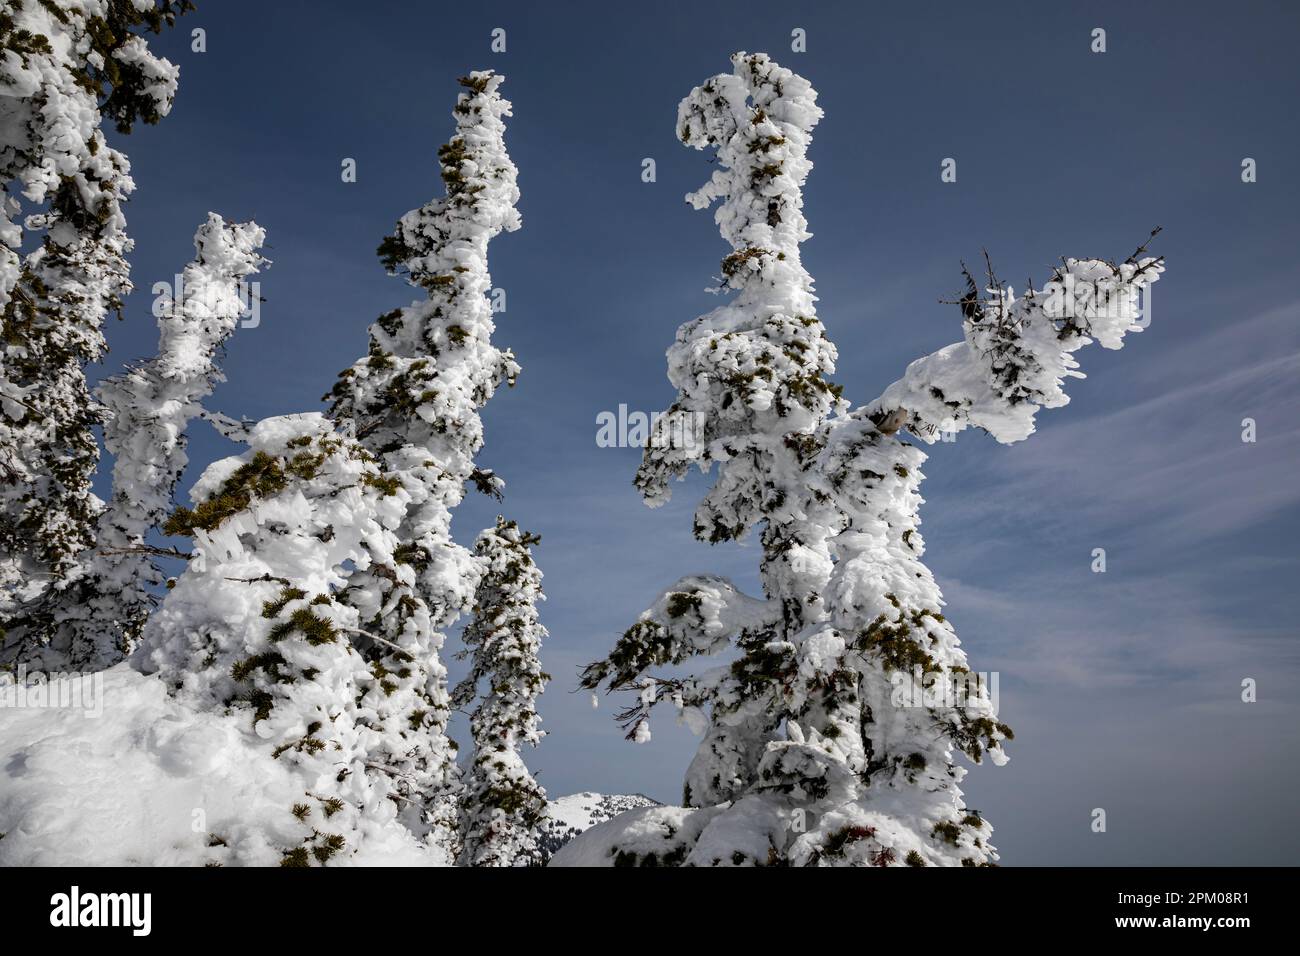 WA23301-00...WASHINGTON - Wet snow plastered and frozen on trees by strong winds on Hurricane Ridge in Olympic National Park. Stock Photo